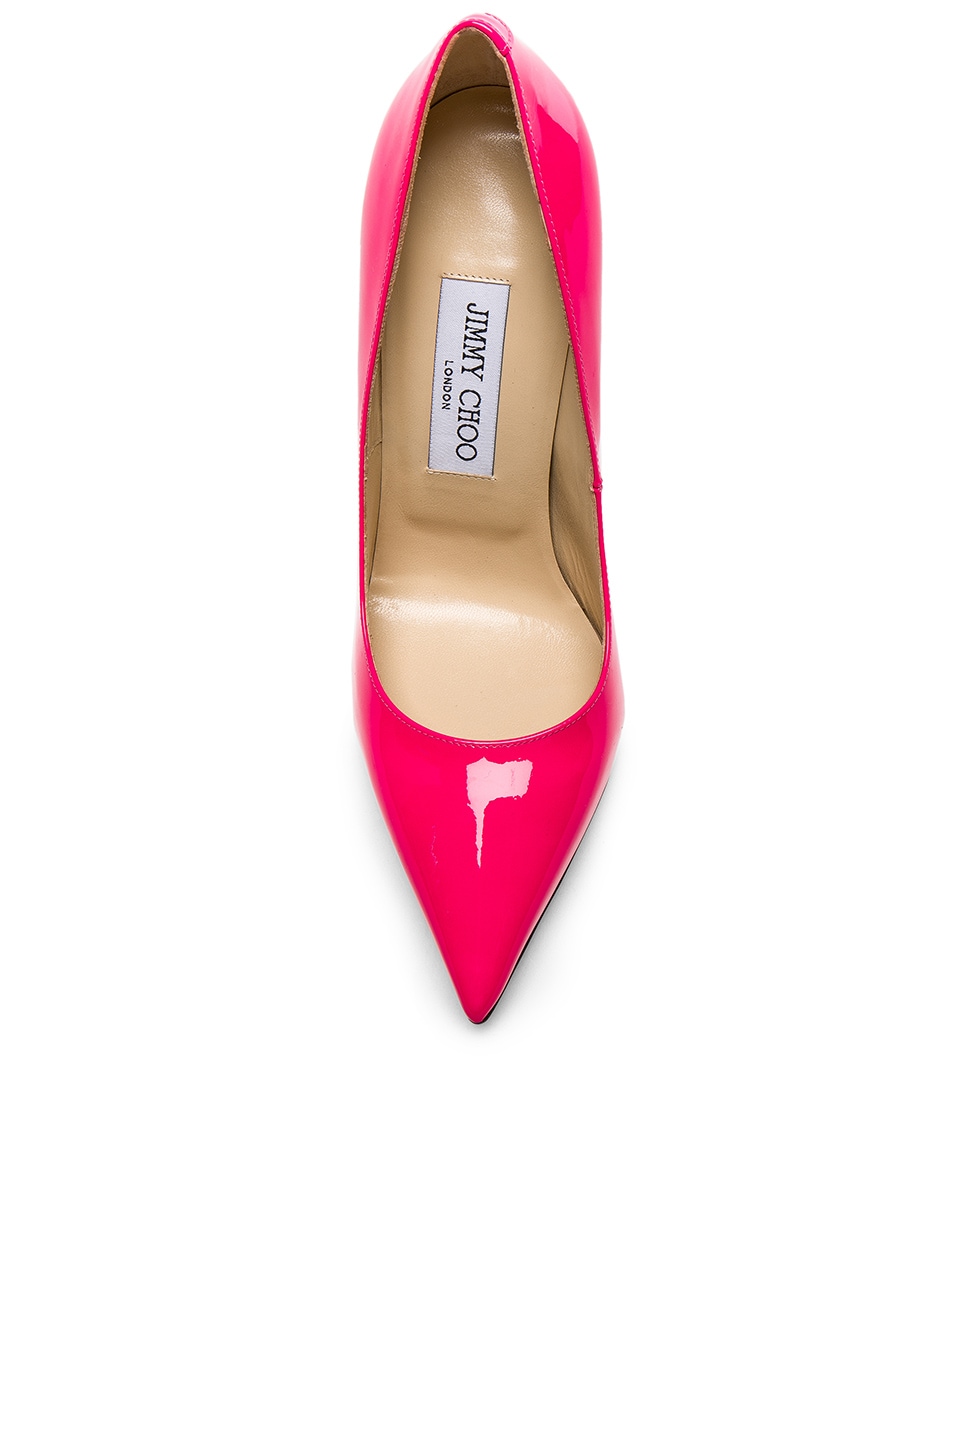 JIMMY CHOO Neon Patent Leather Anouk Heels in Shocking Pink | ModeSens